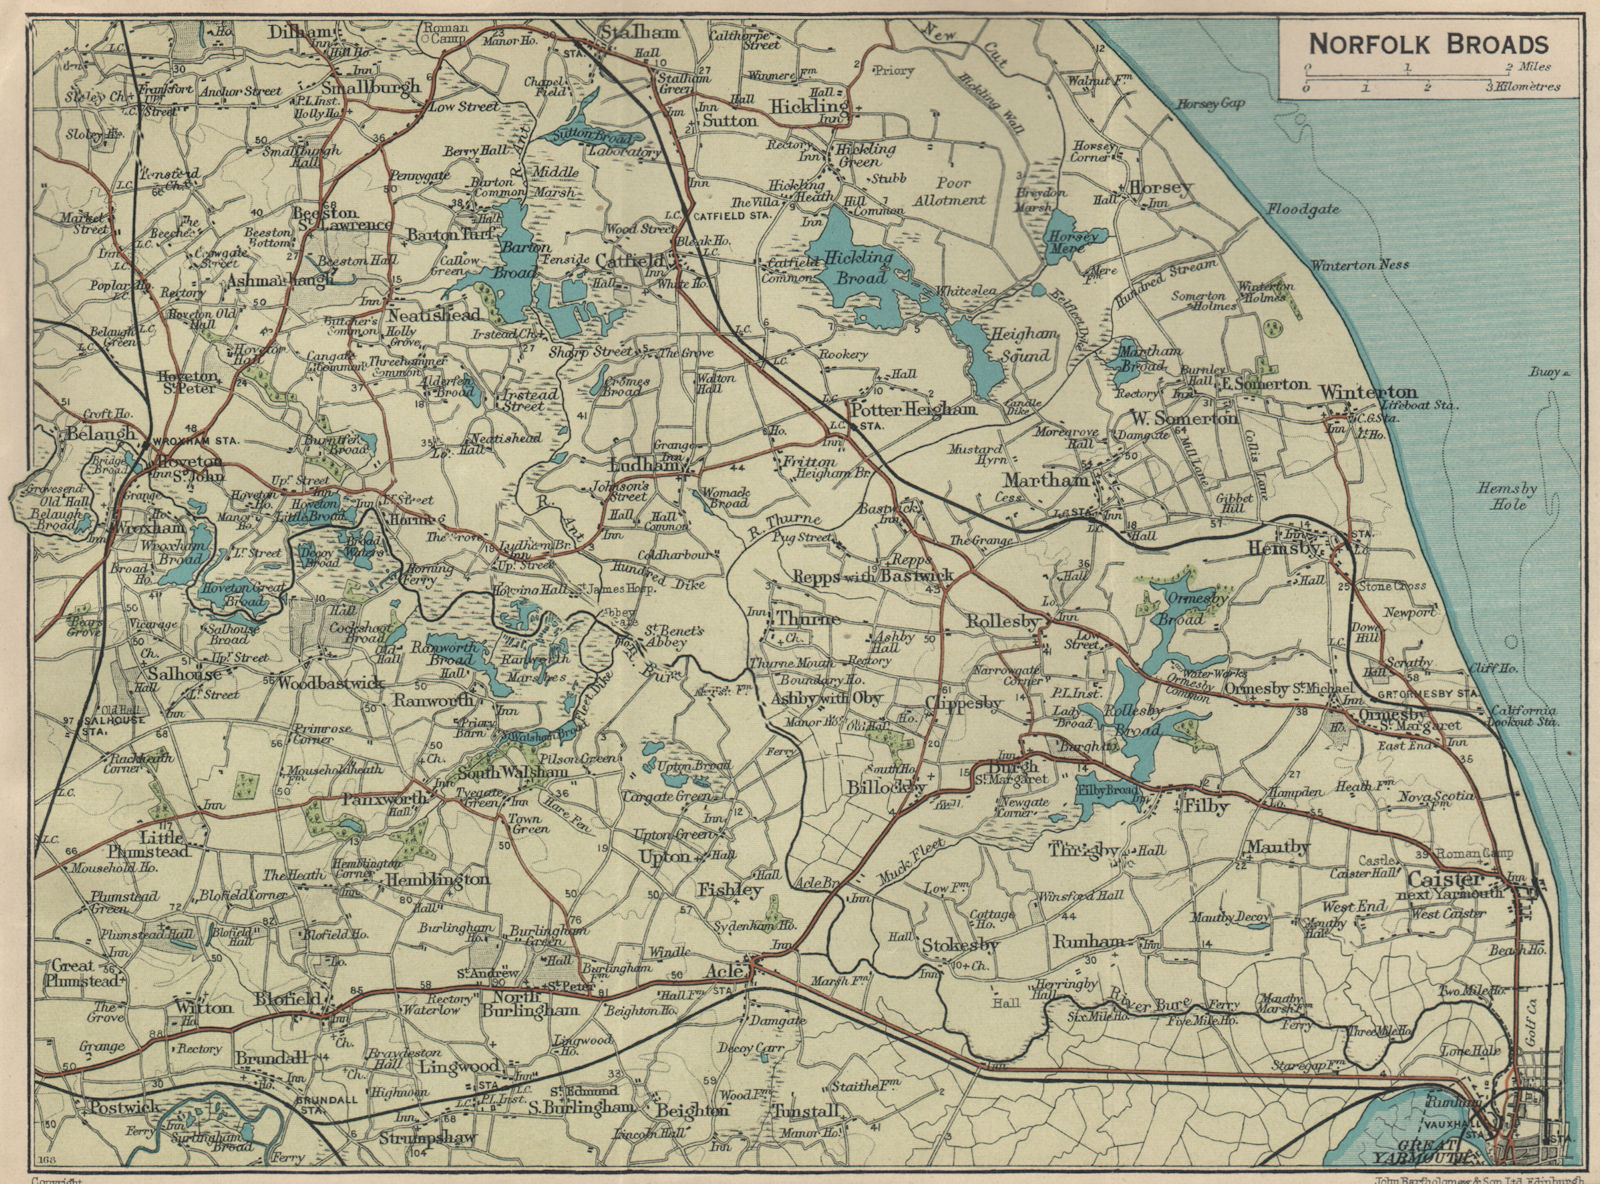 NORFOLK BROADS. Great Yarmouth. Caister Winterton Wroxham 1939 old vintage map